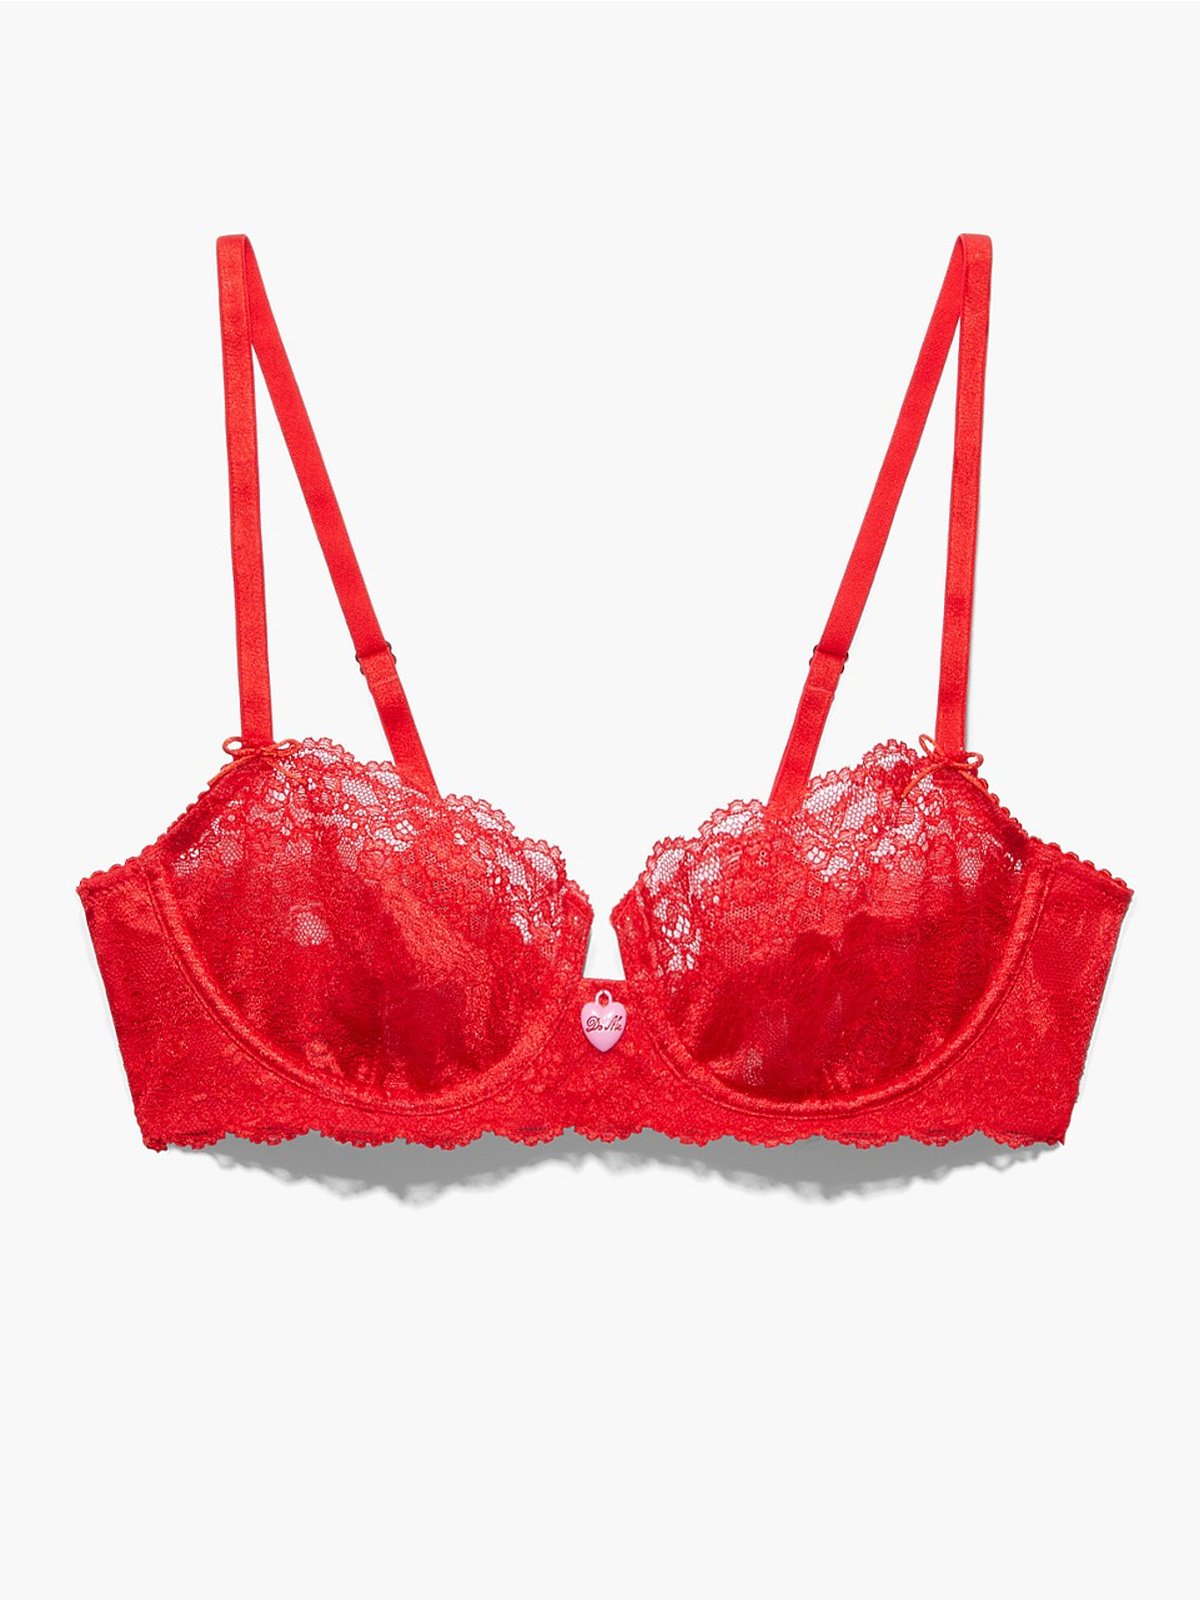 Candy Hearts Unlined Lace Balconette Bra